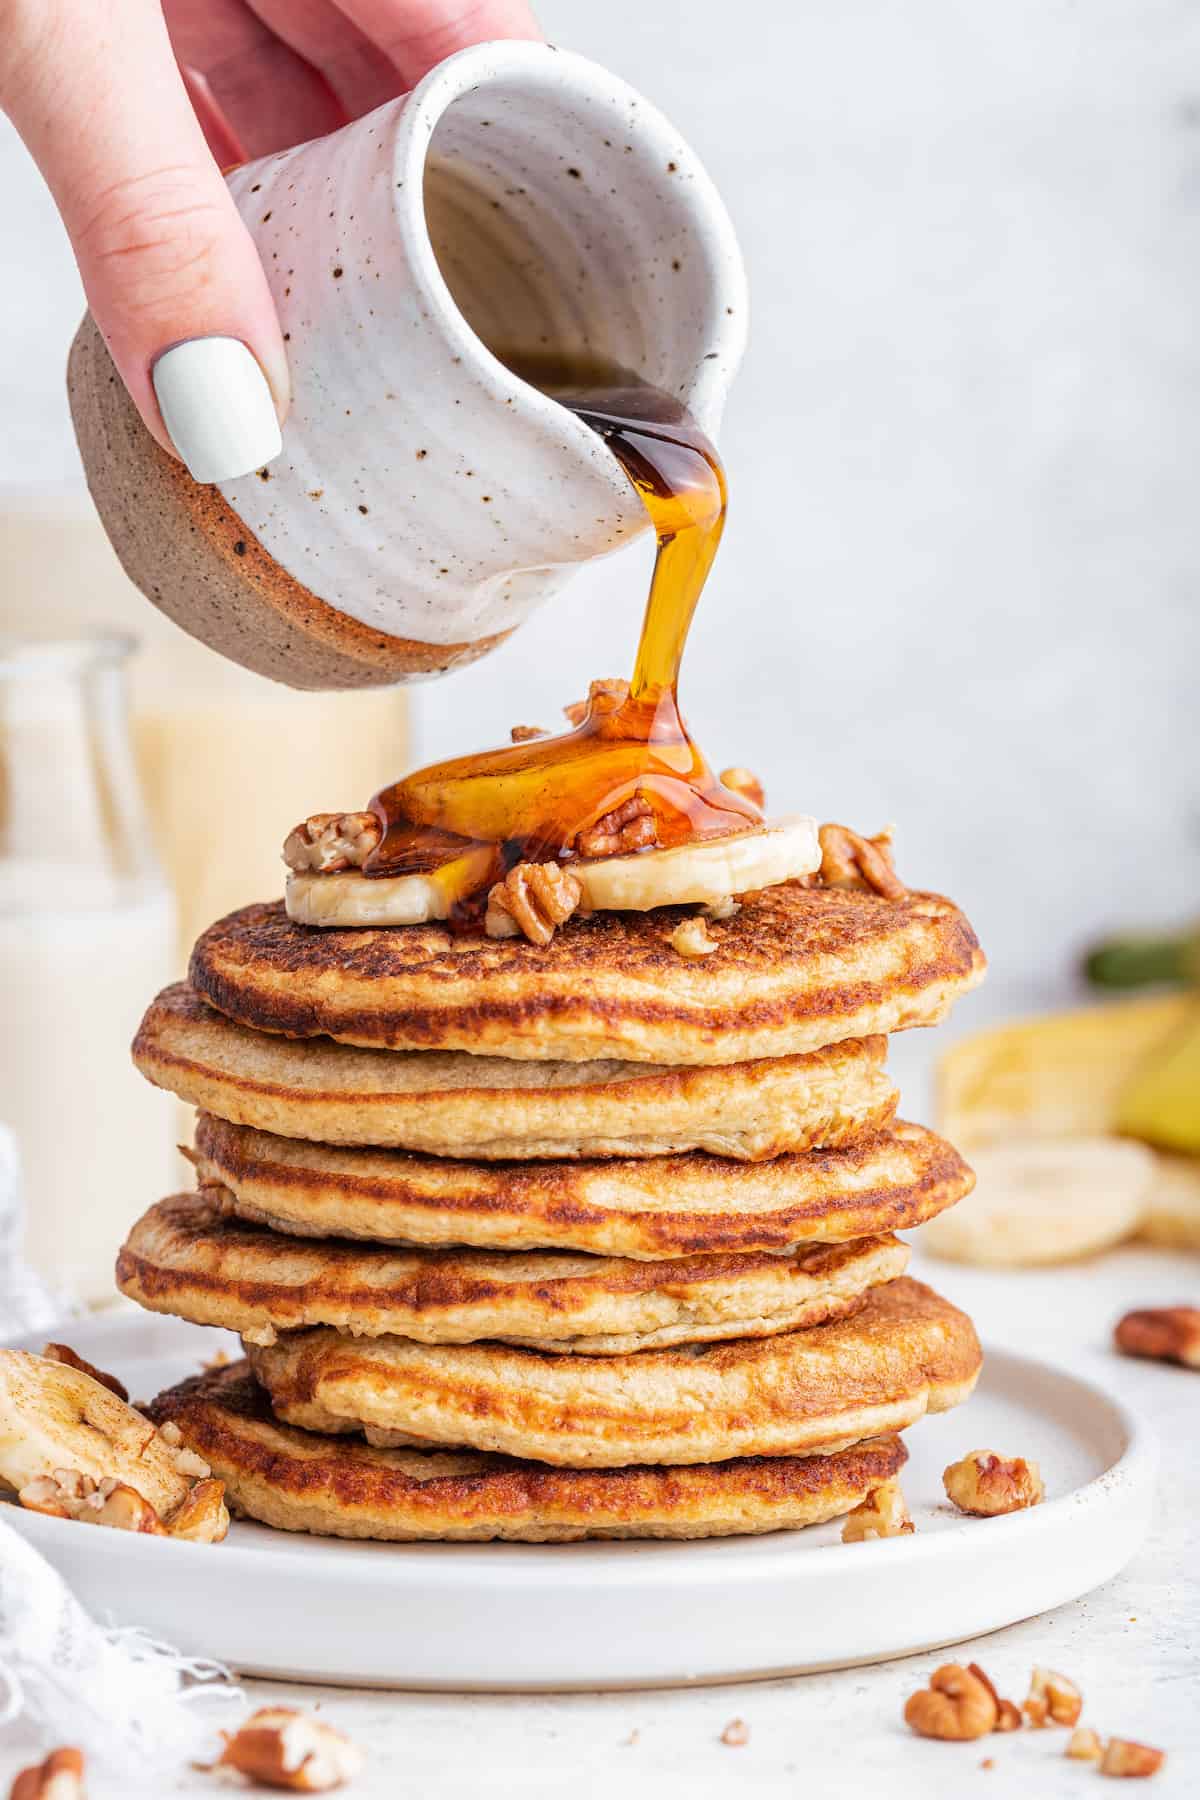 Pouring maple syrup onto stack of oatmeal banana pancakes